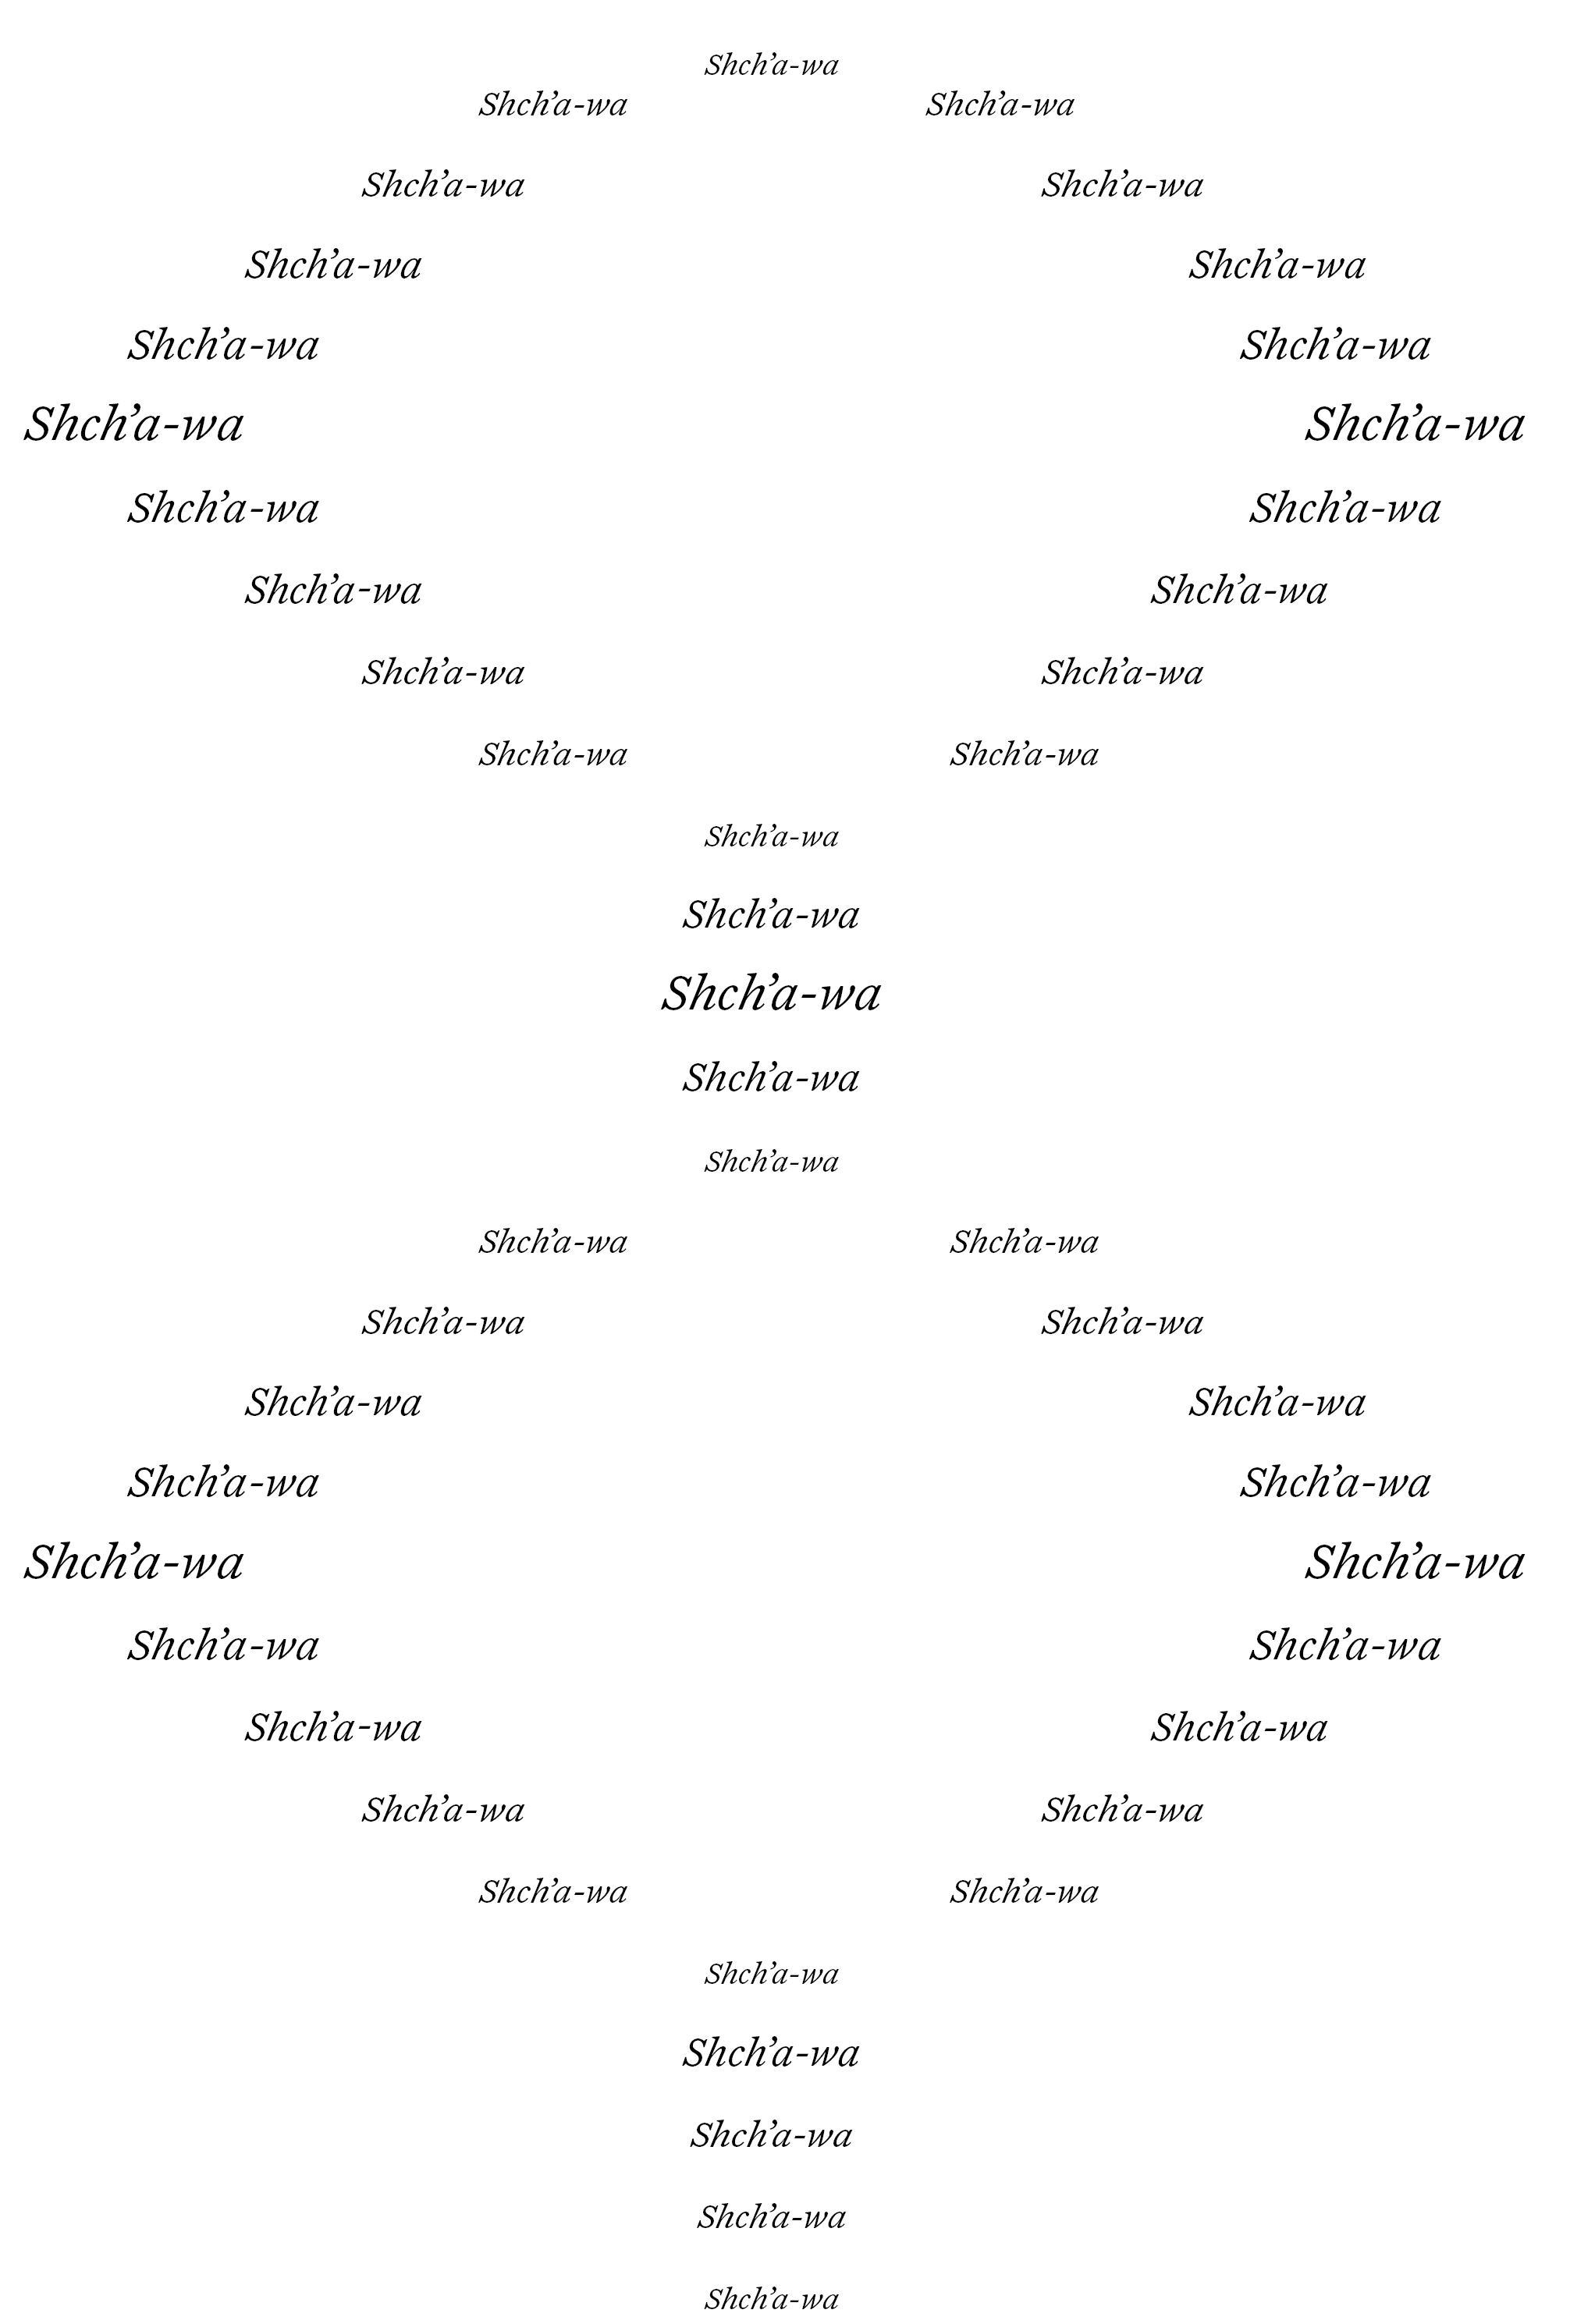 This is a visual and concrete poem. "Shch’a-wa" is repeated throughout to create the shape of the poem.